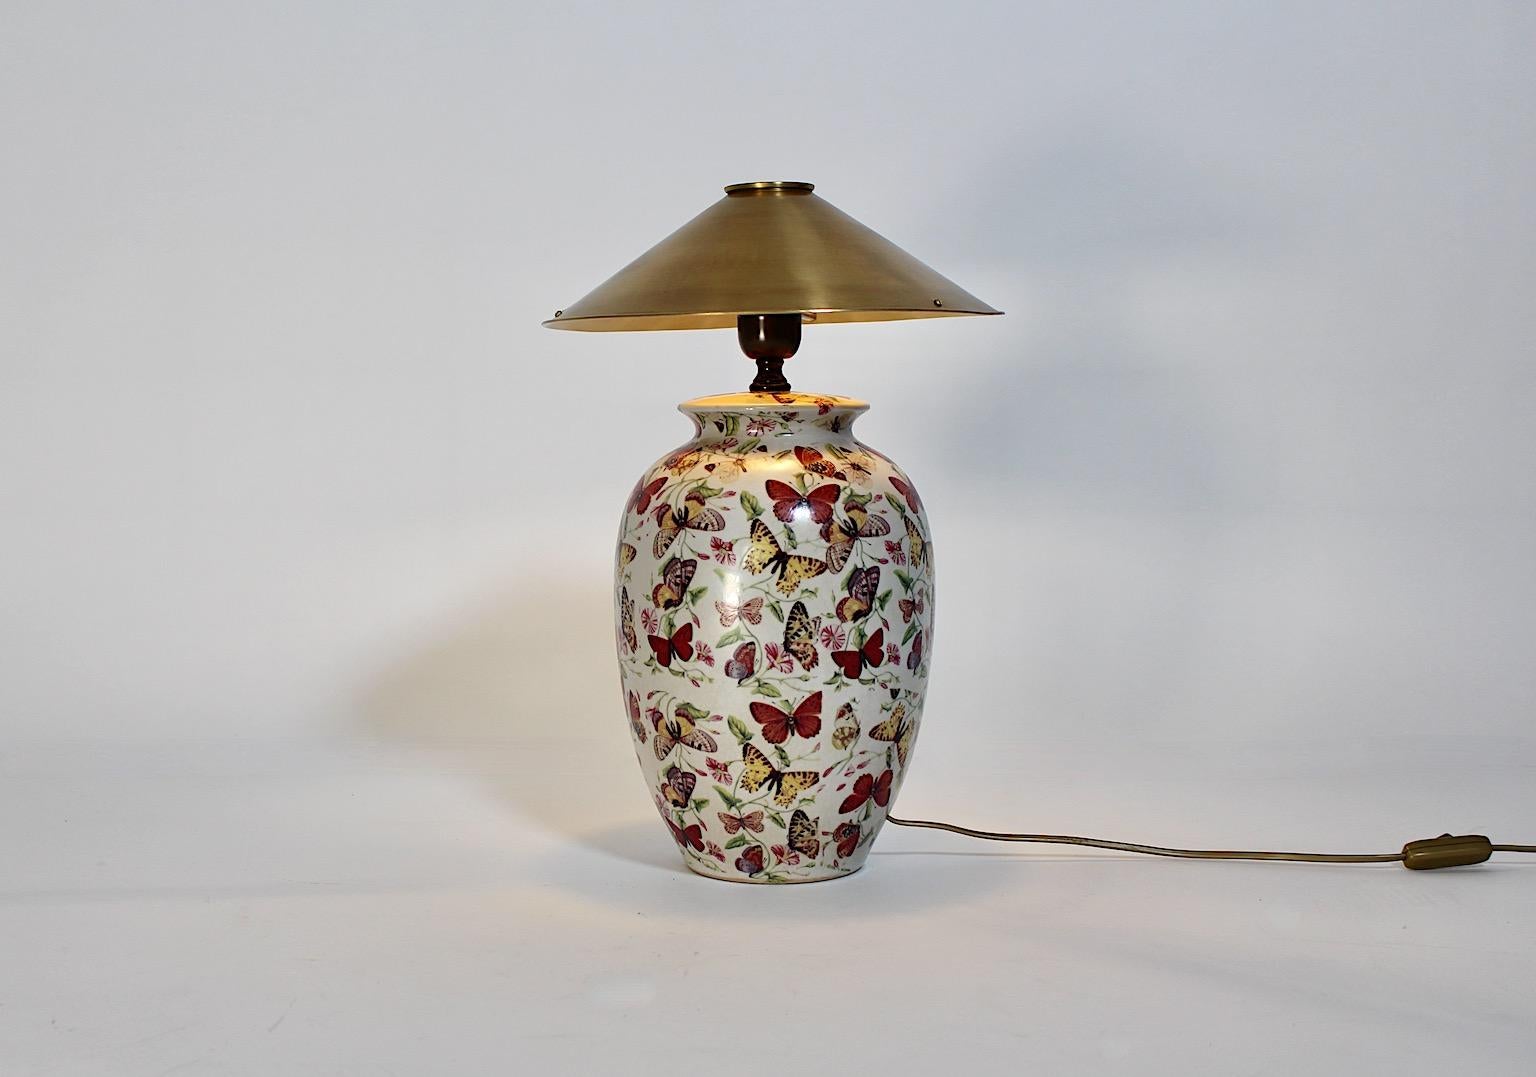 Modern vintage table lamp from ceramic and brass with multicolored printed floral and fauna butterfly and flowers decor 1980s.
This amazing and charming table lamp from ceramic and brass shows a ceramic body full of printed multicolored butterflies